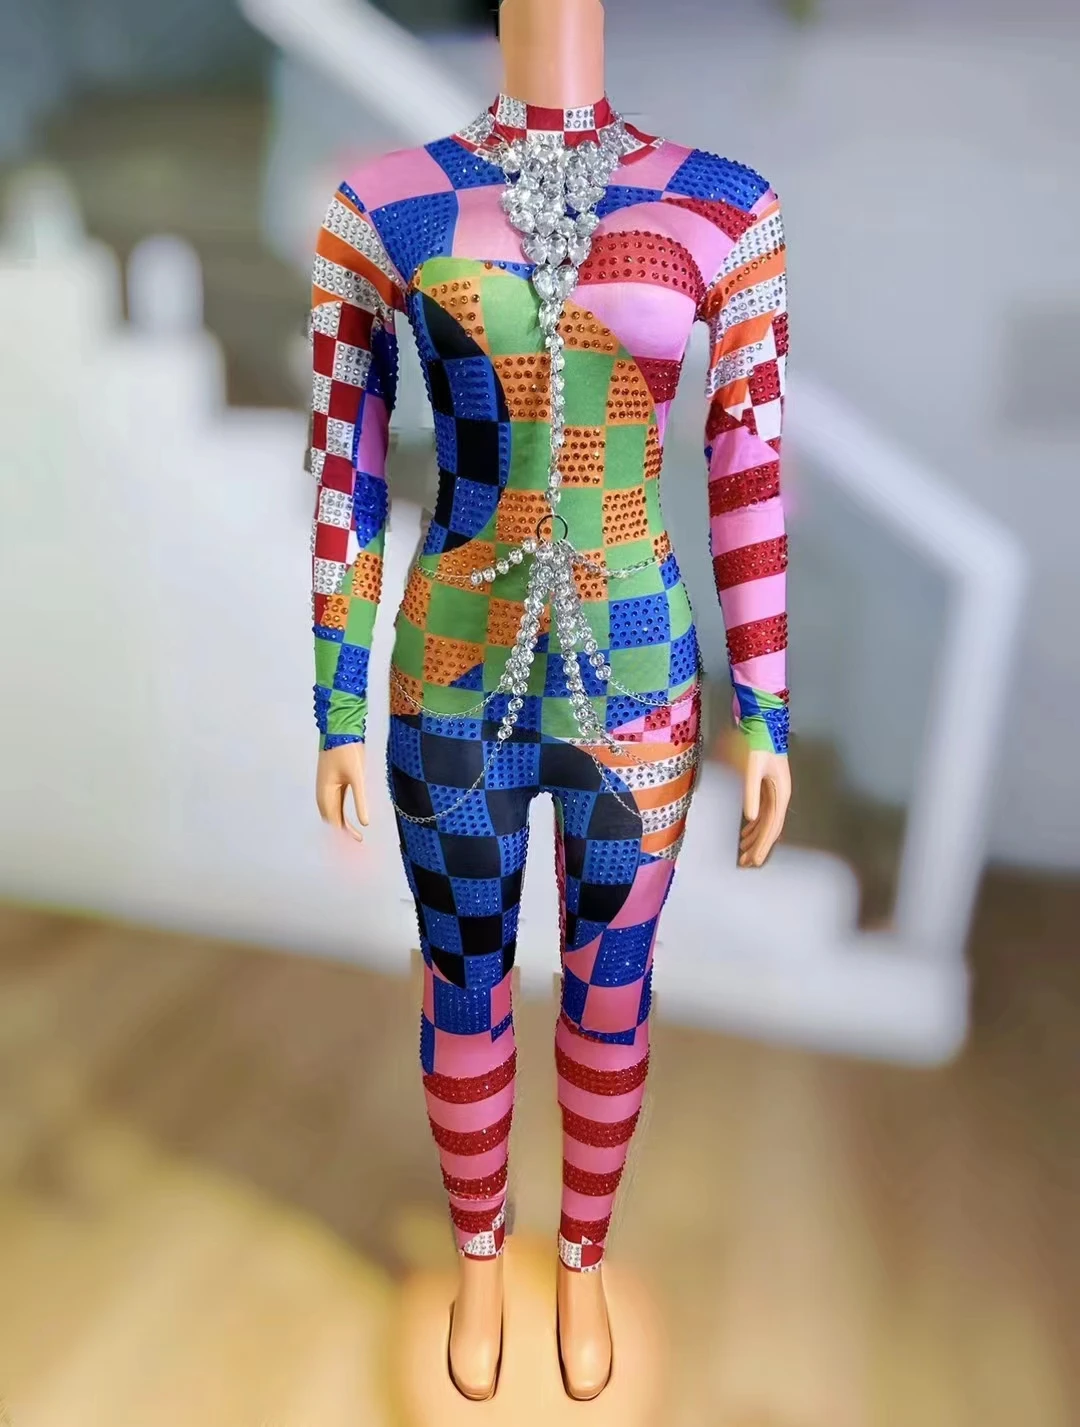 

Joker Bi Colorful Splicing Personalized StreetStyle Fashion Sexy jumpsuit Long Sleeved TightPerformance Clothing A496